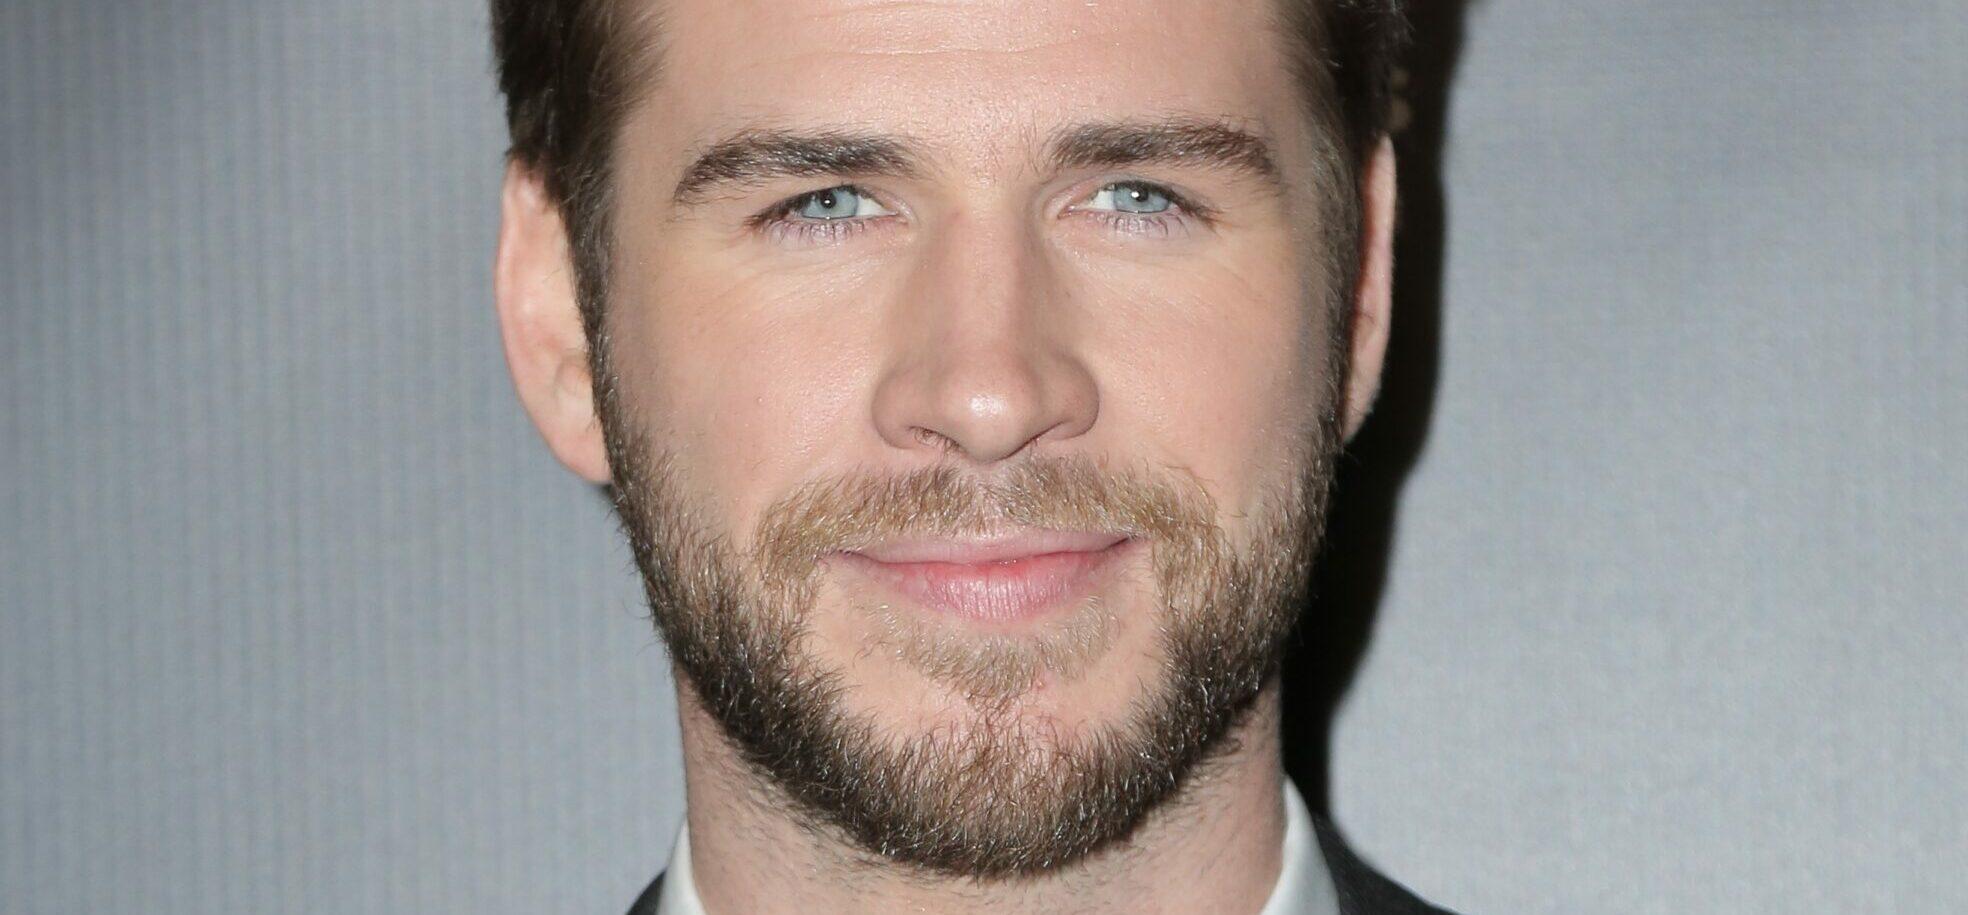 Liam Hemsworth Rumored to Be Single After Ending 3-Year Relationship With Model GF